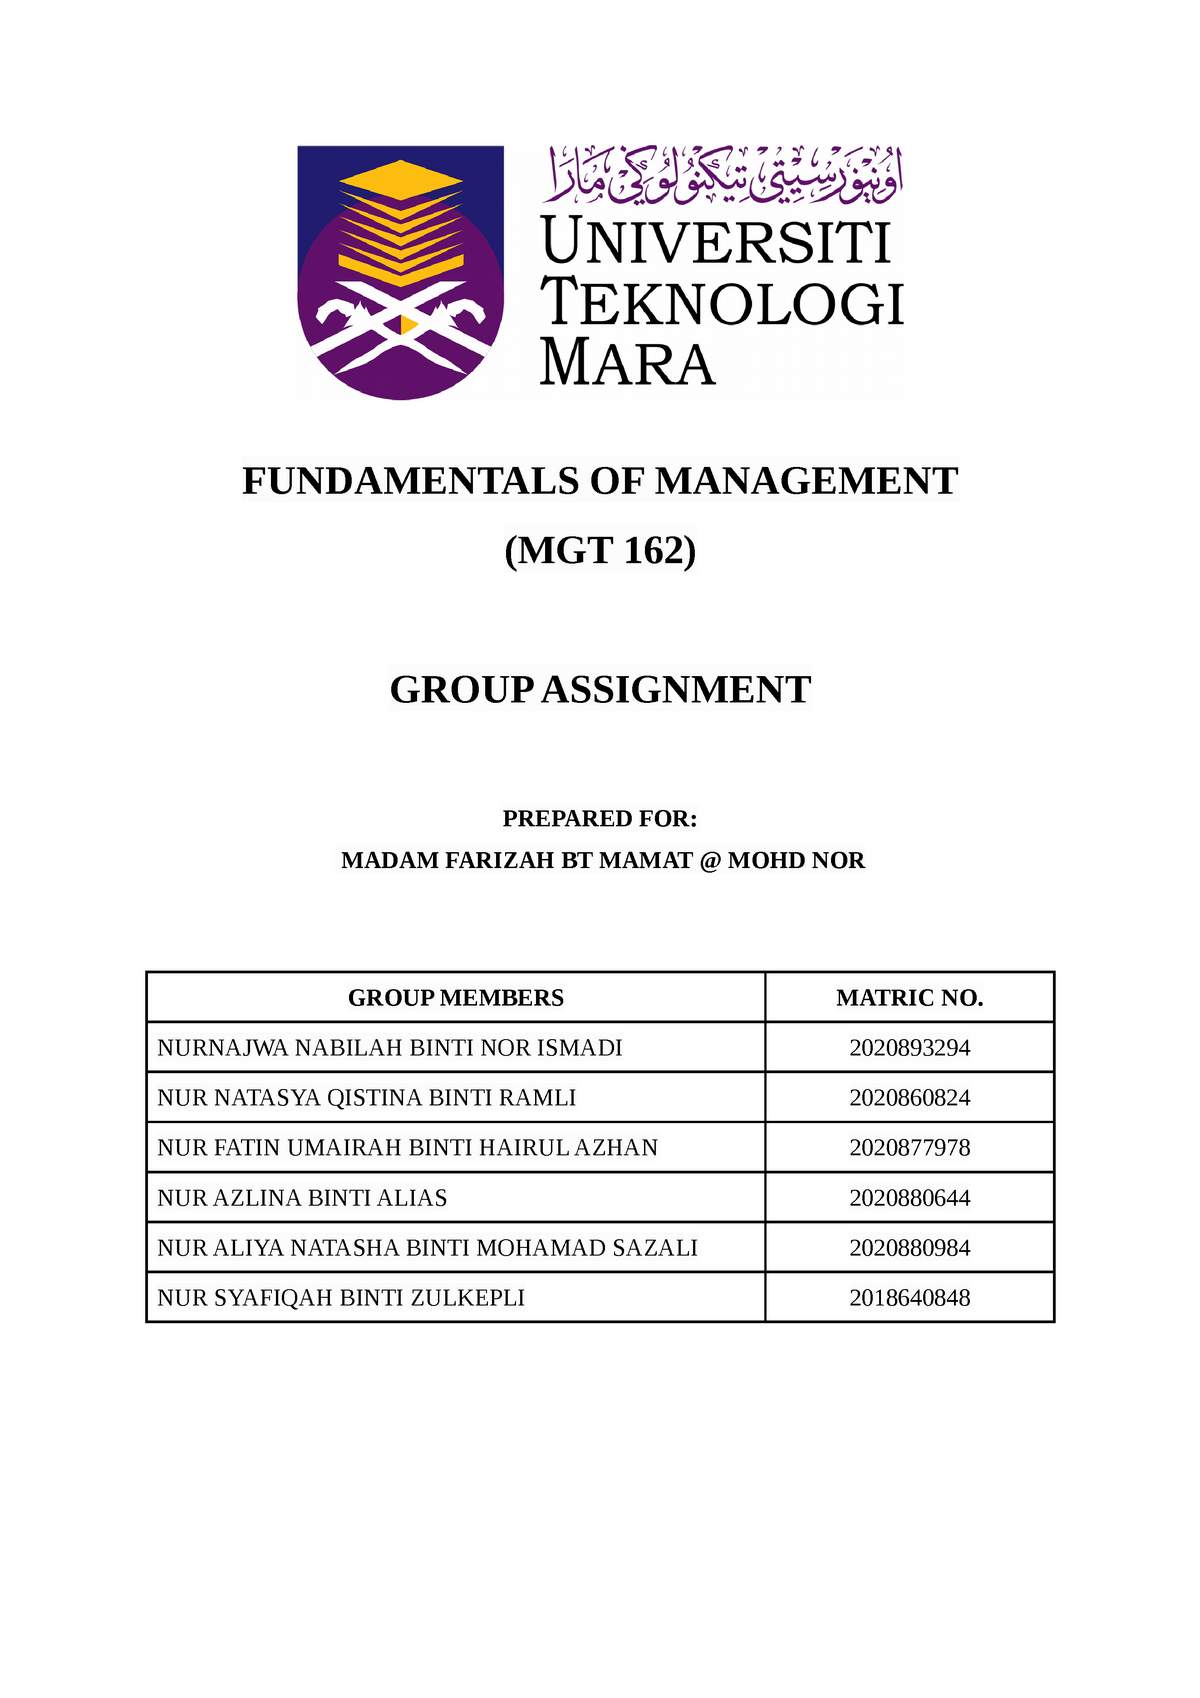 mgt162 assignment company